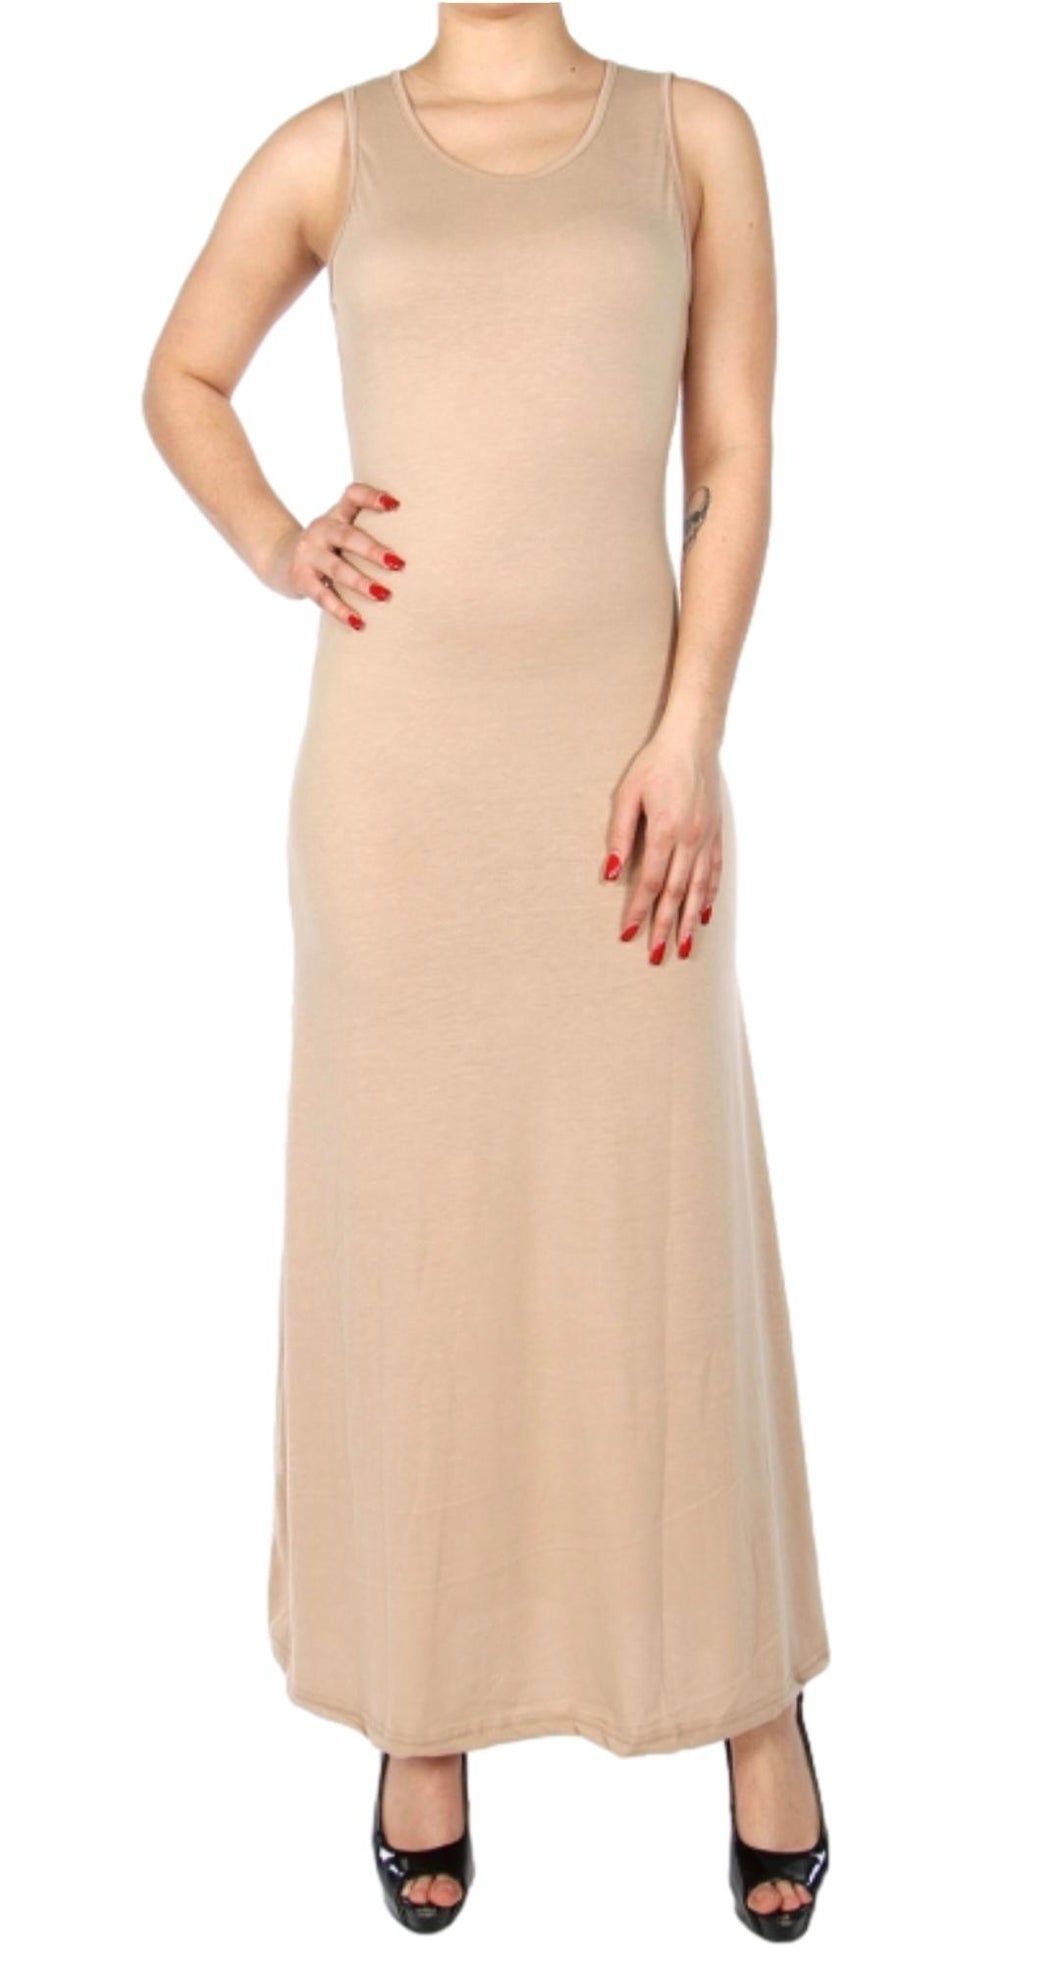 Women's Sassy Maxi Dress in Neutral Tone Beige and Gray with Slash Detail on Back in Beige or Gray